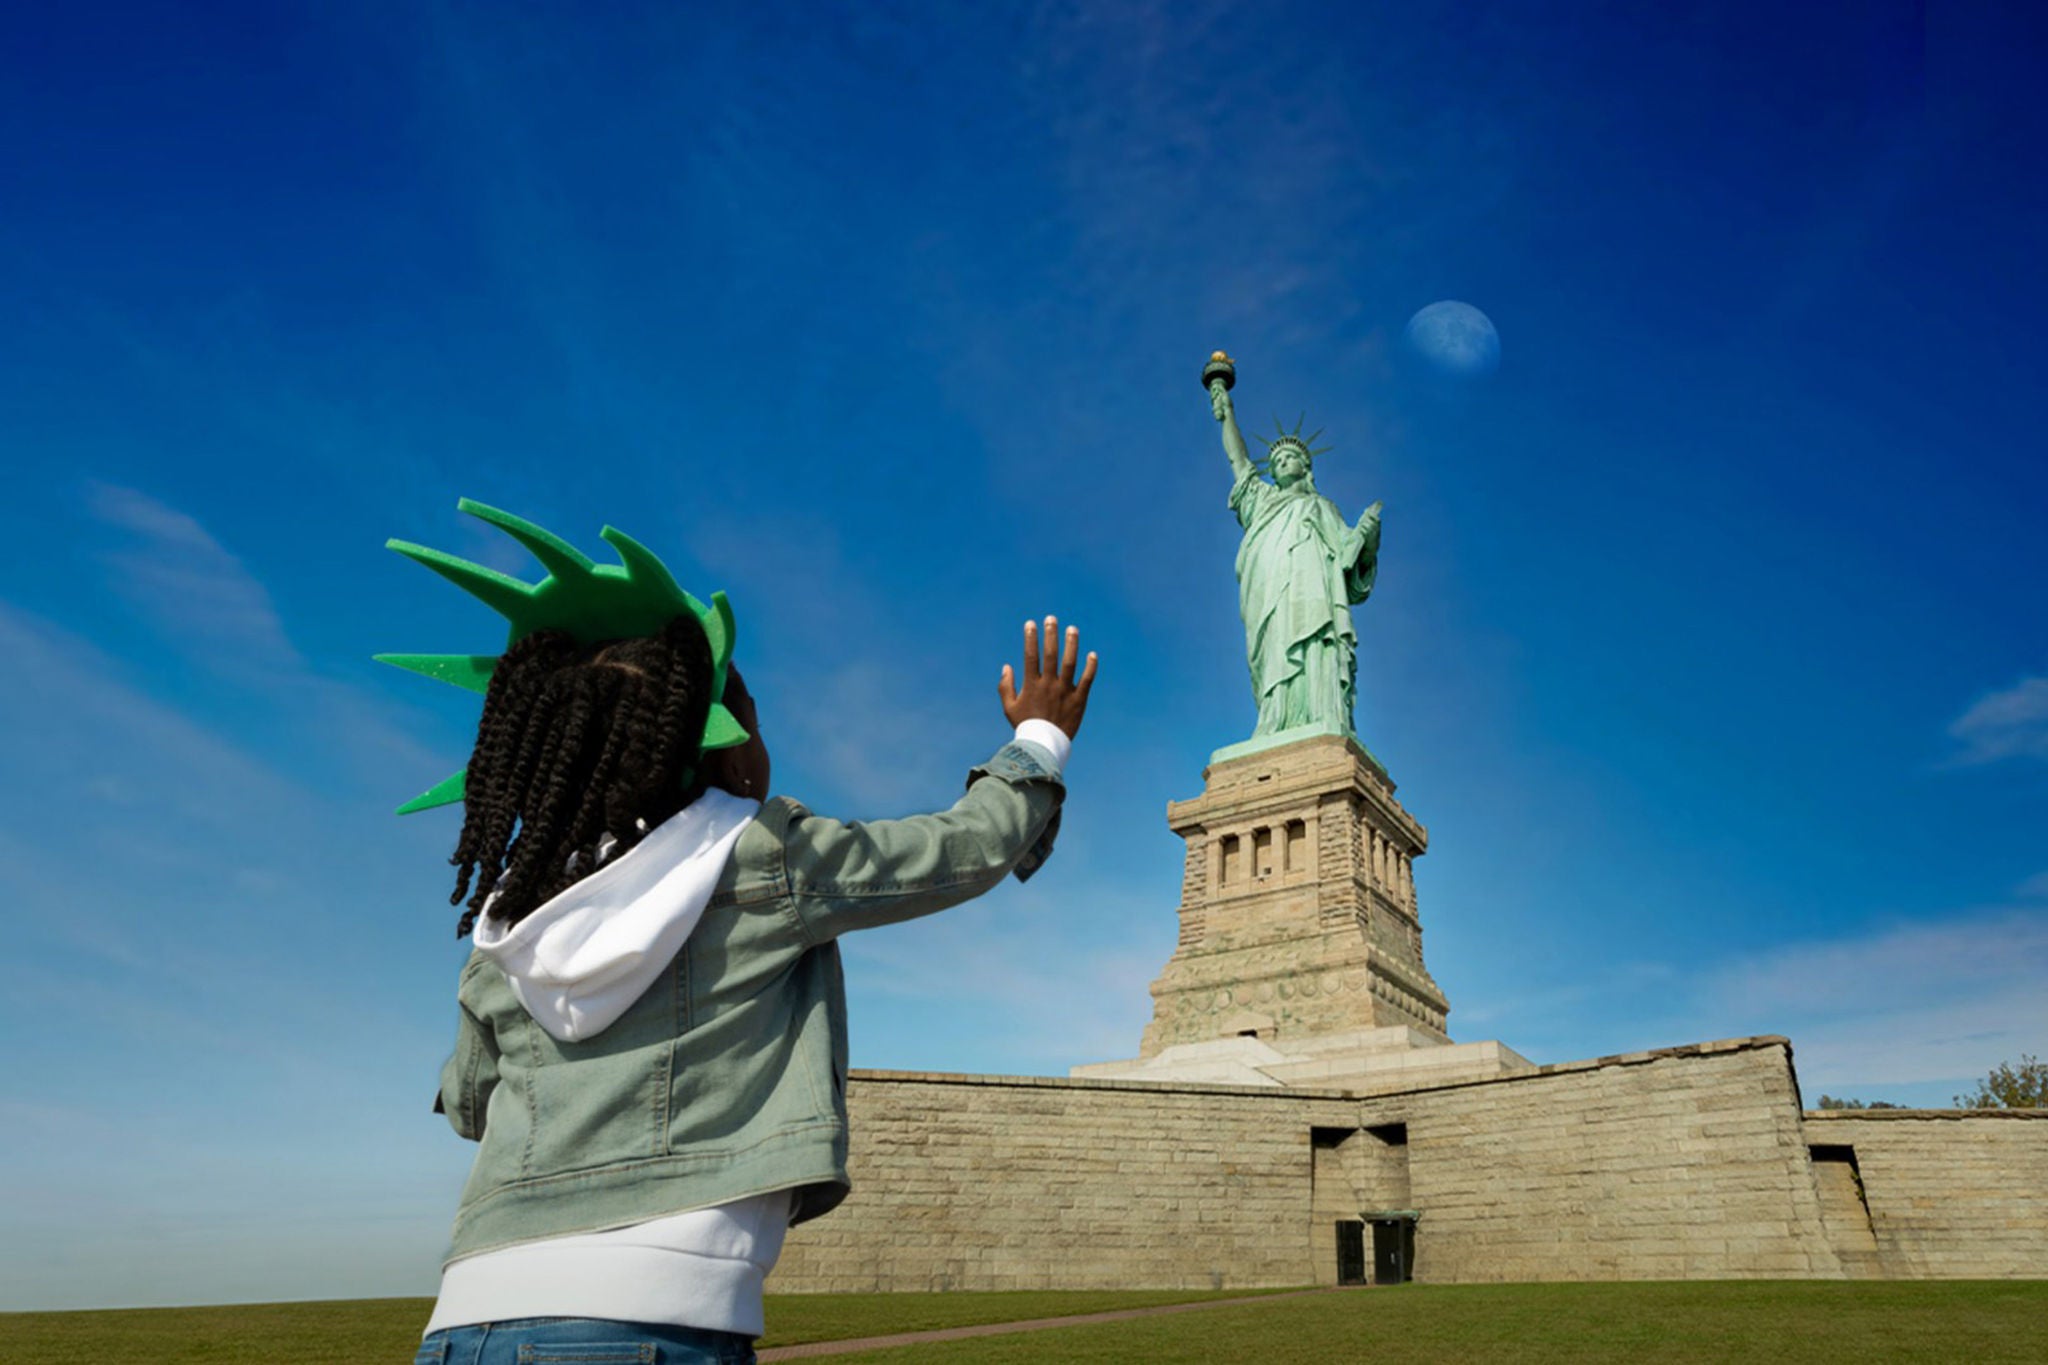 ey-girl-waving-at-the-stature-of-liberty-background